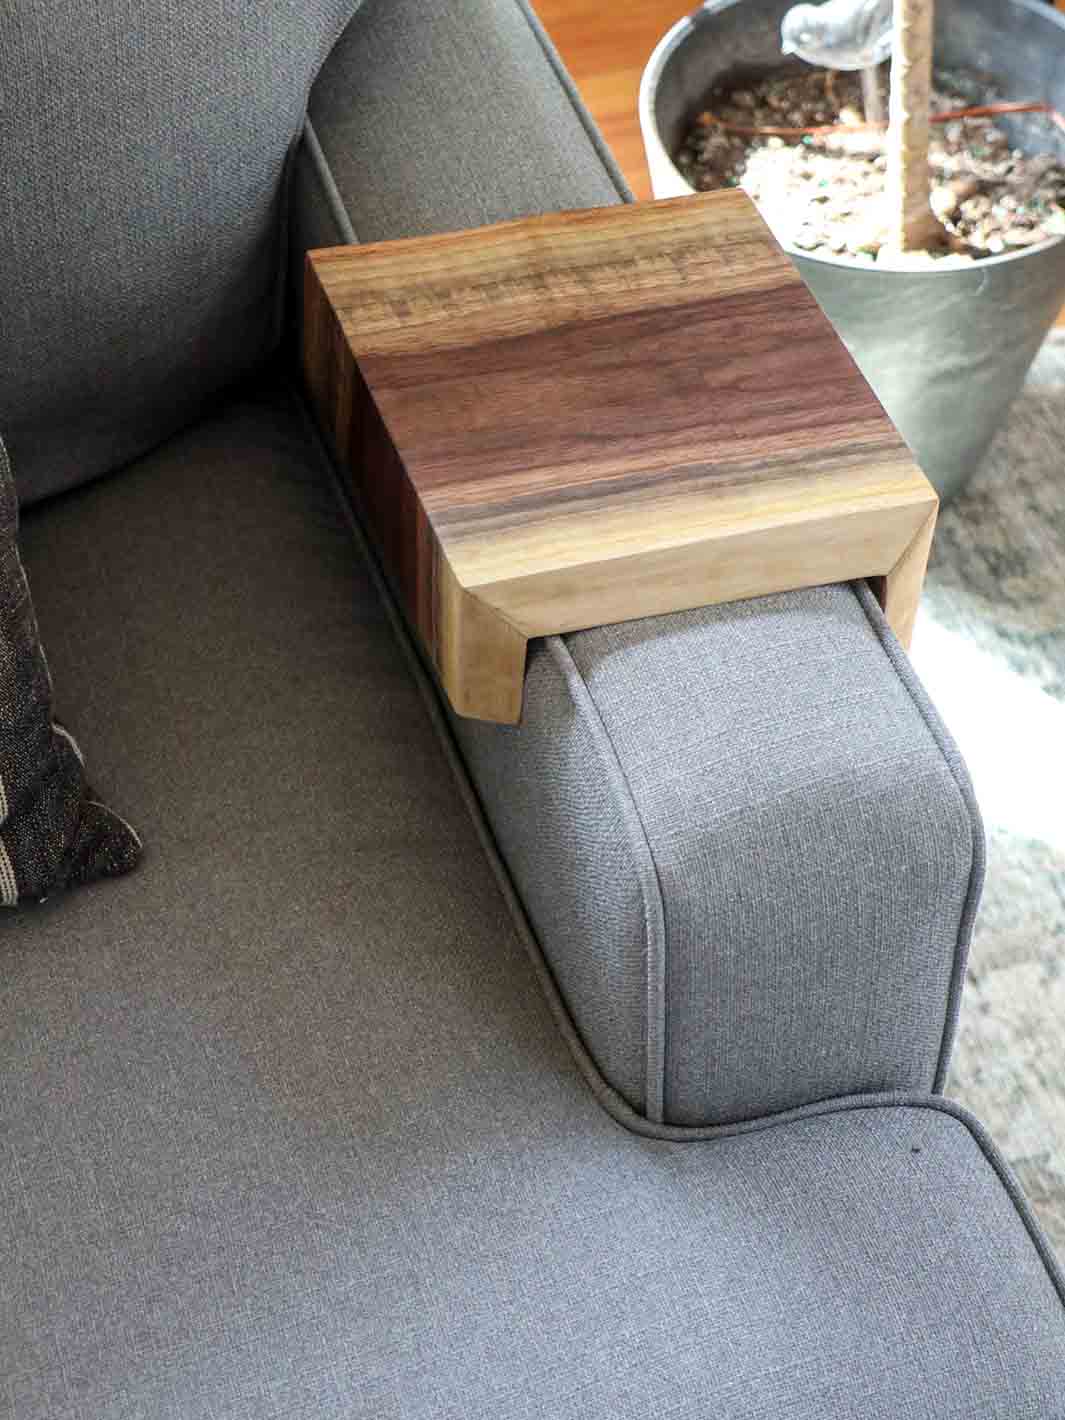 Live Edge Walnut Waterfall Armrest Sofa Table - Extra Long Square To the Floor Earthly Comfort Side Tables 2128-8